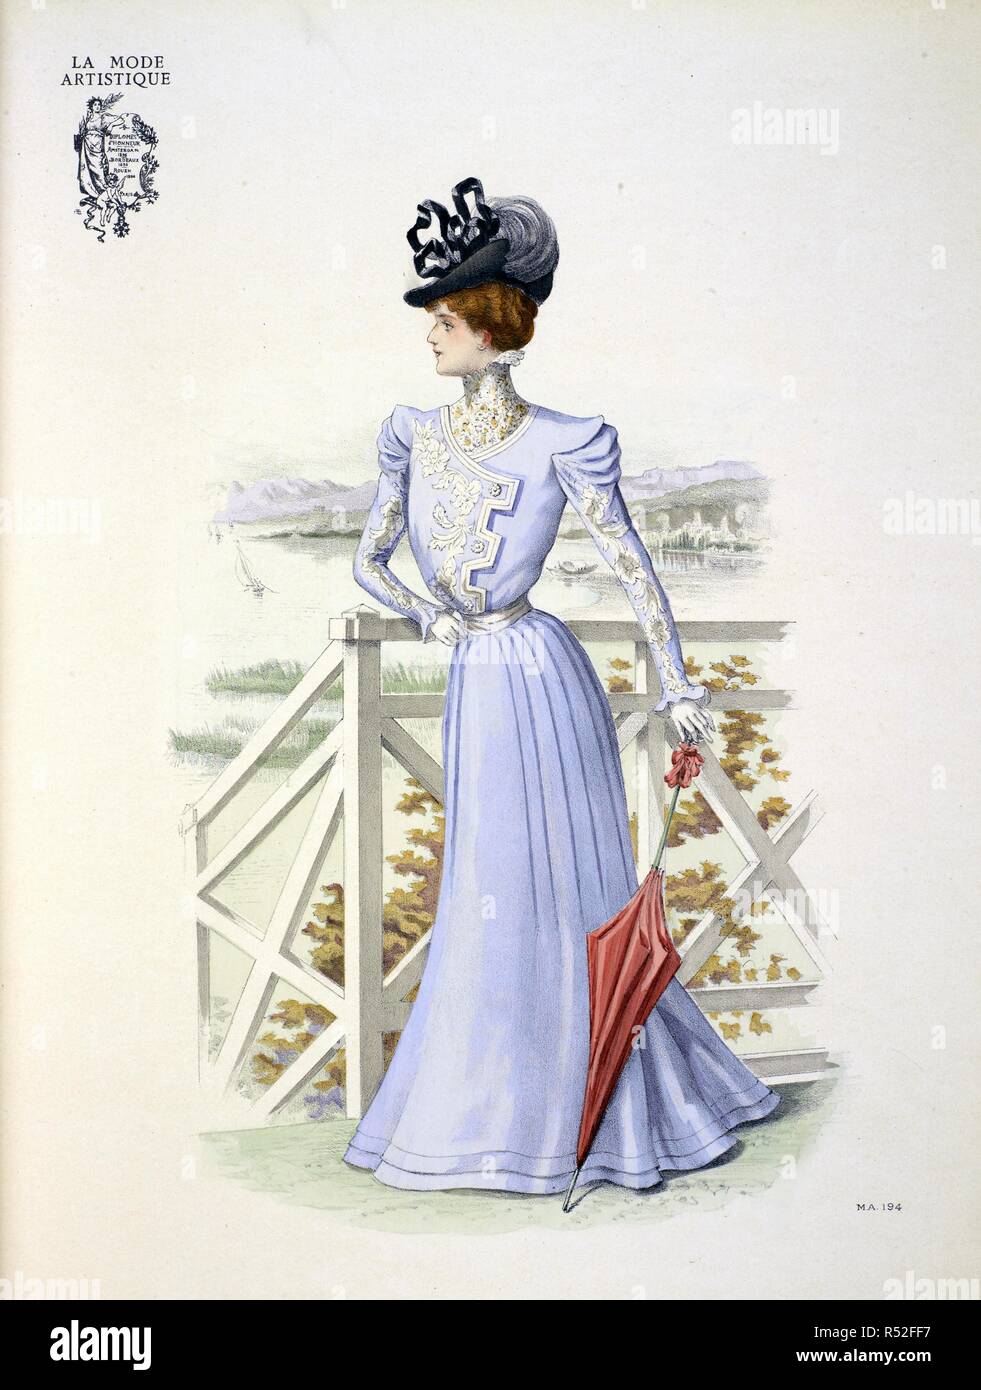 A design by Paquin. 'A new and very pretty skirt which is suitable for wearing at the sea-side, of lavender blue piquÃ©, made for ... Mademoiselle CÃ©cile Sorel. Width is given to the dress by the machine stictched folds which are left loose a little below the skirt. The bodice which is slightly pouched is cut in battlements, each square or tab being edged with tiny tucks and fastened by a crystal button: the yoke is entirely covered with guipure lace, while the bodice and sleeves are embroidered in white. The hat ... is of black rice straw trimmed with a wired velvet ribbon true lovers knot a Stock Photo